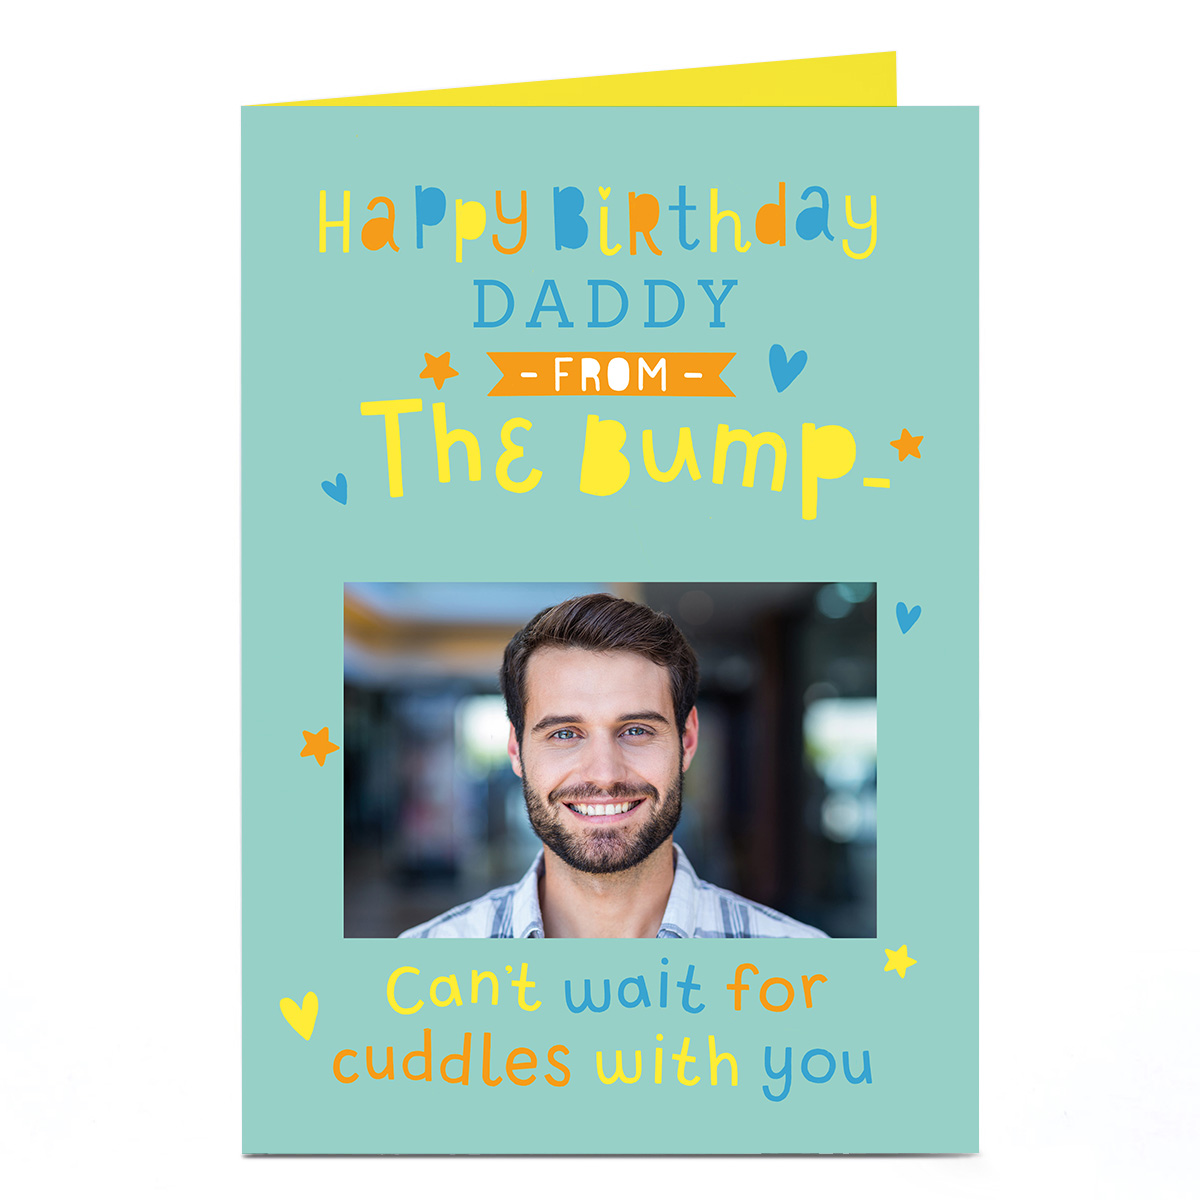 Photo Birthday Card - Cuddles From The Bump